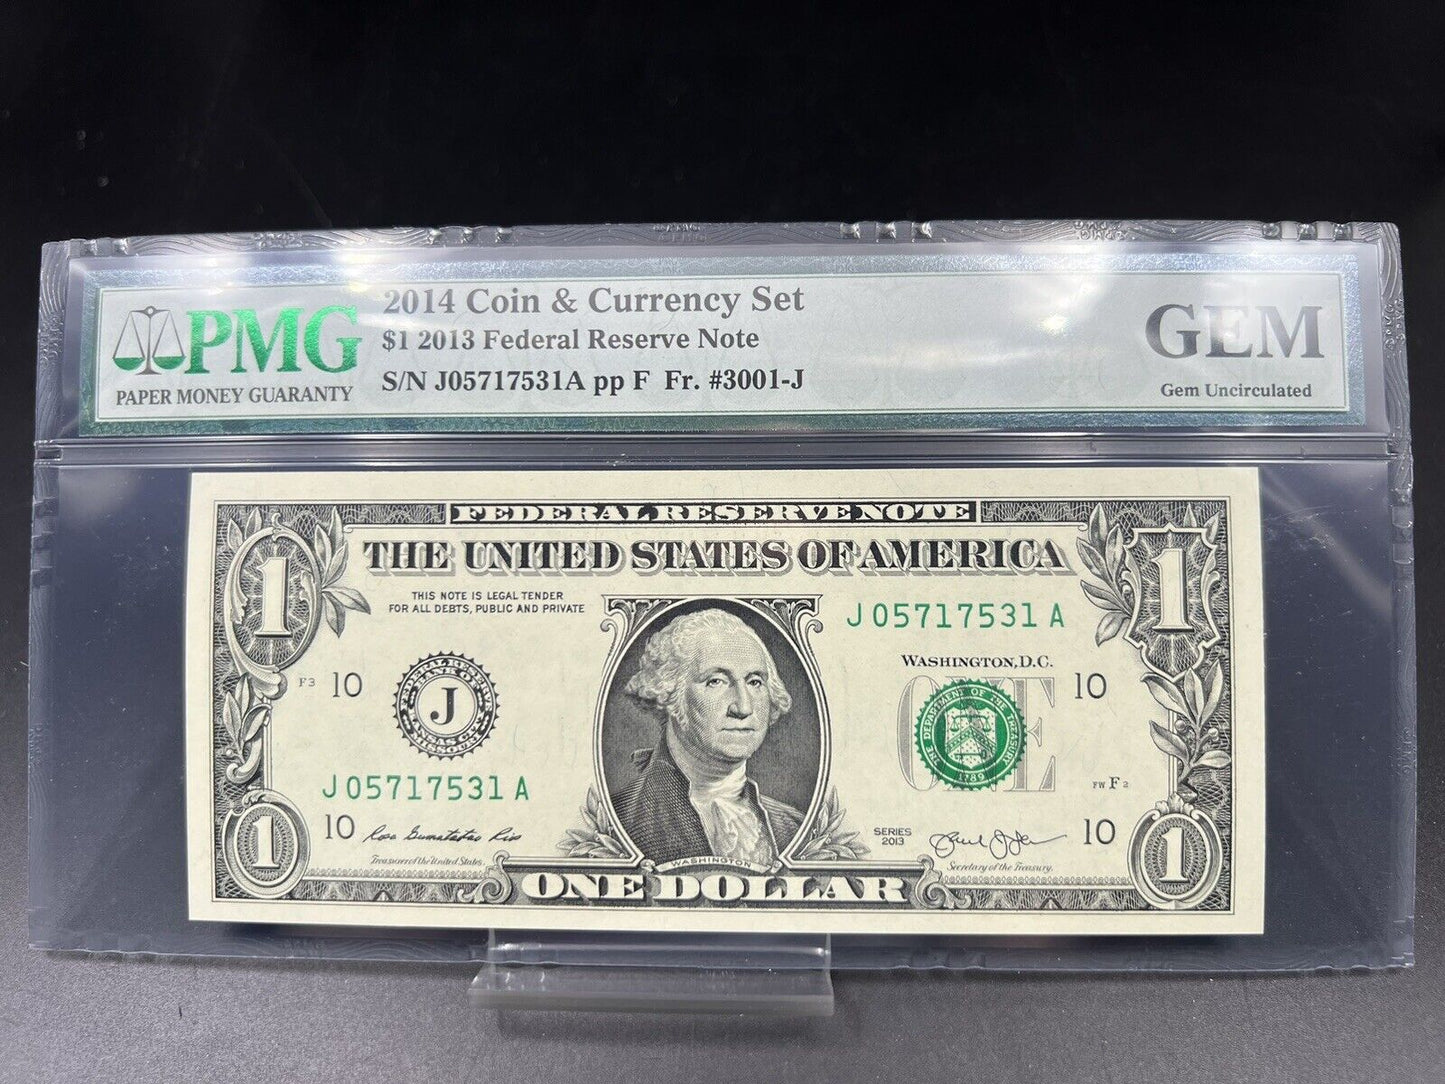 2013 / 2014 FRN Federal Reserve Note Bill GEM UNC PMG COIN AND CURRENCY SET #B